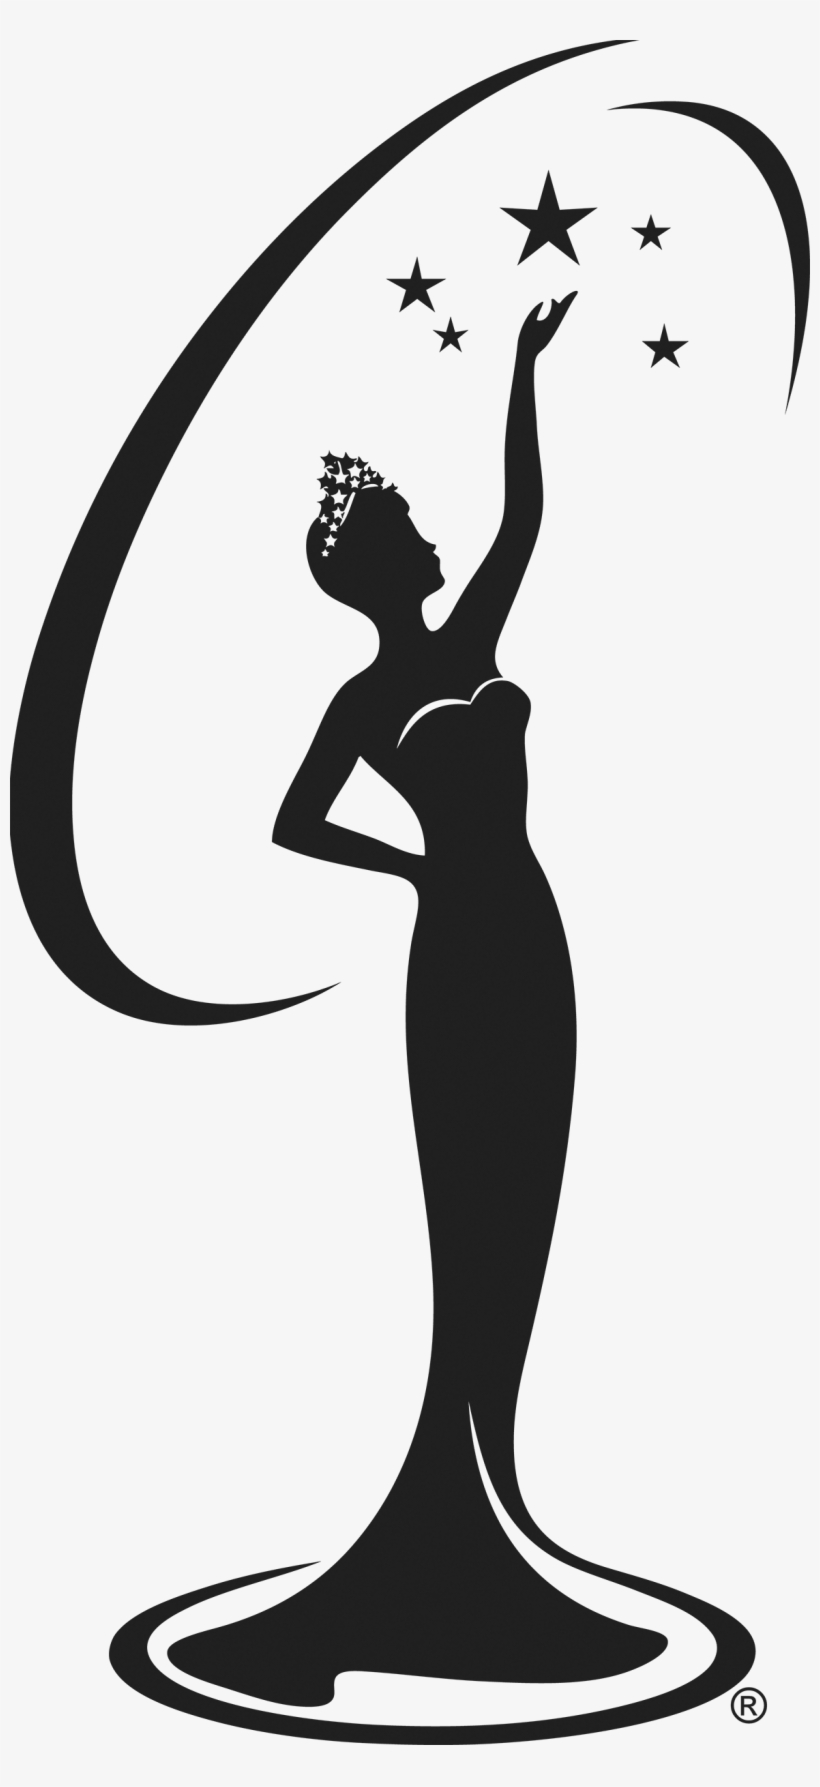 2018 Miss Texas Usa Pageant - Miss Universe Logo Png, transparent png #1484888